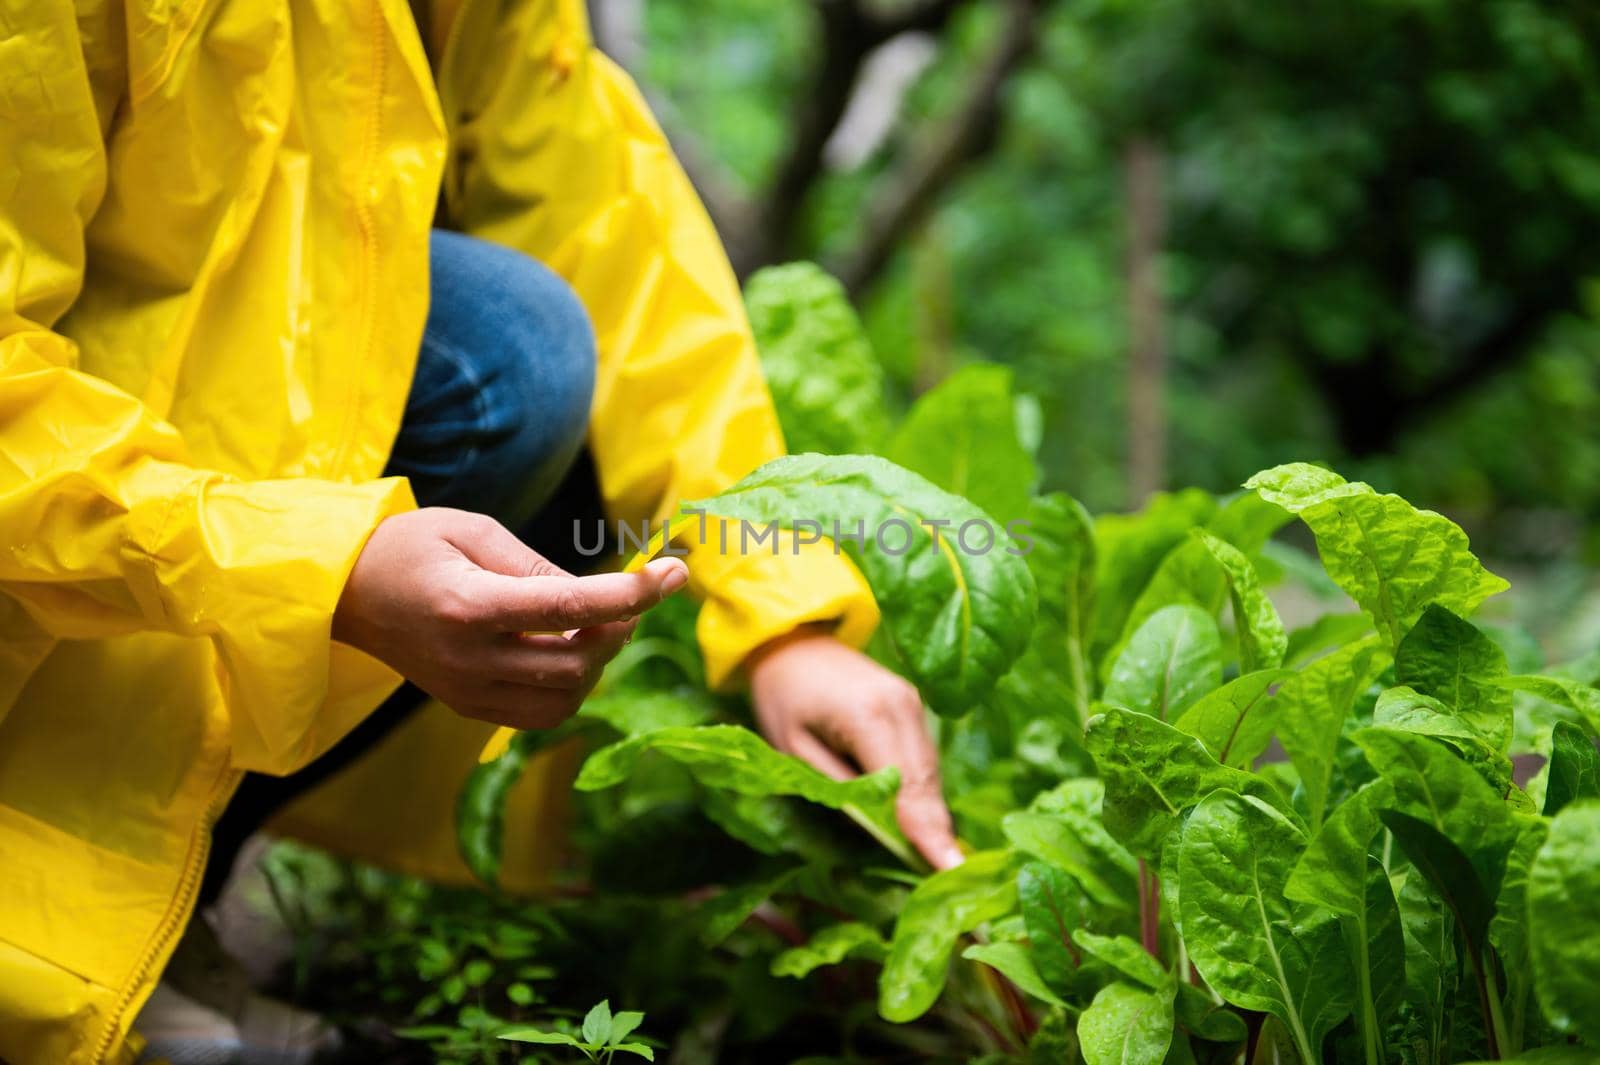 Details: Hands of a farmer agronomist in yellow raincoat, harvesting fresh swiss chard leaves from organic vegetables garden. Growing ecologically friendly homegrown produce. Eco farming. Close-up.